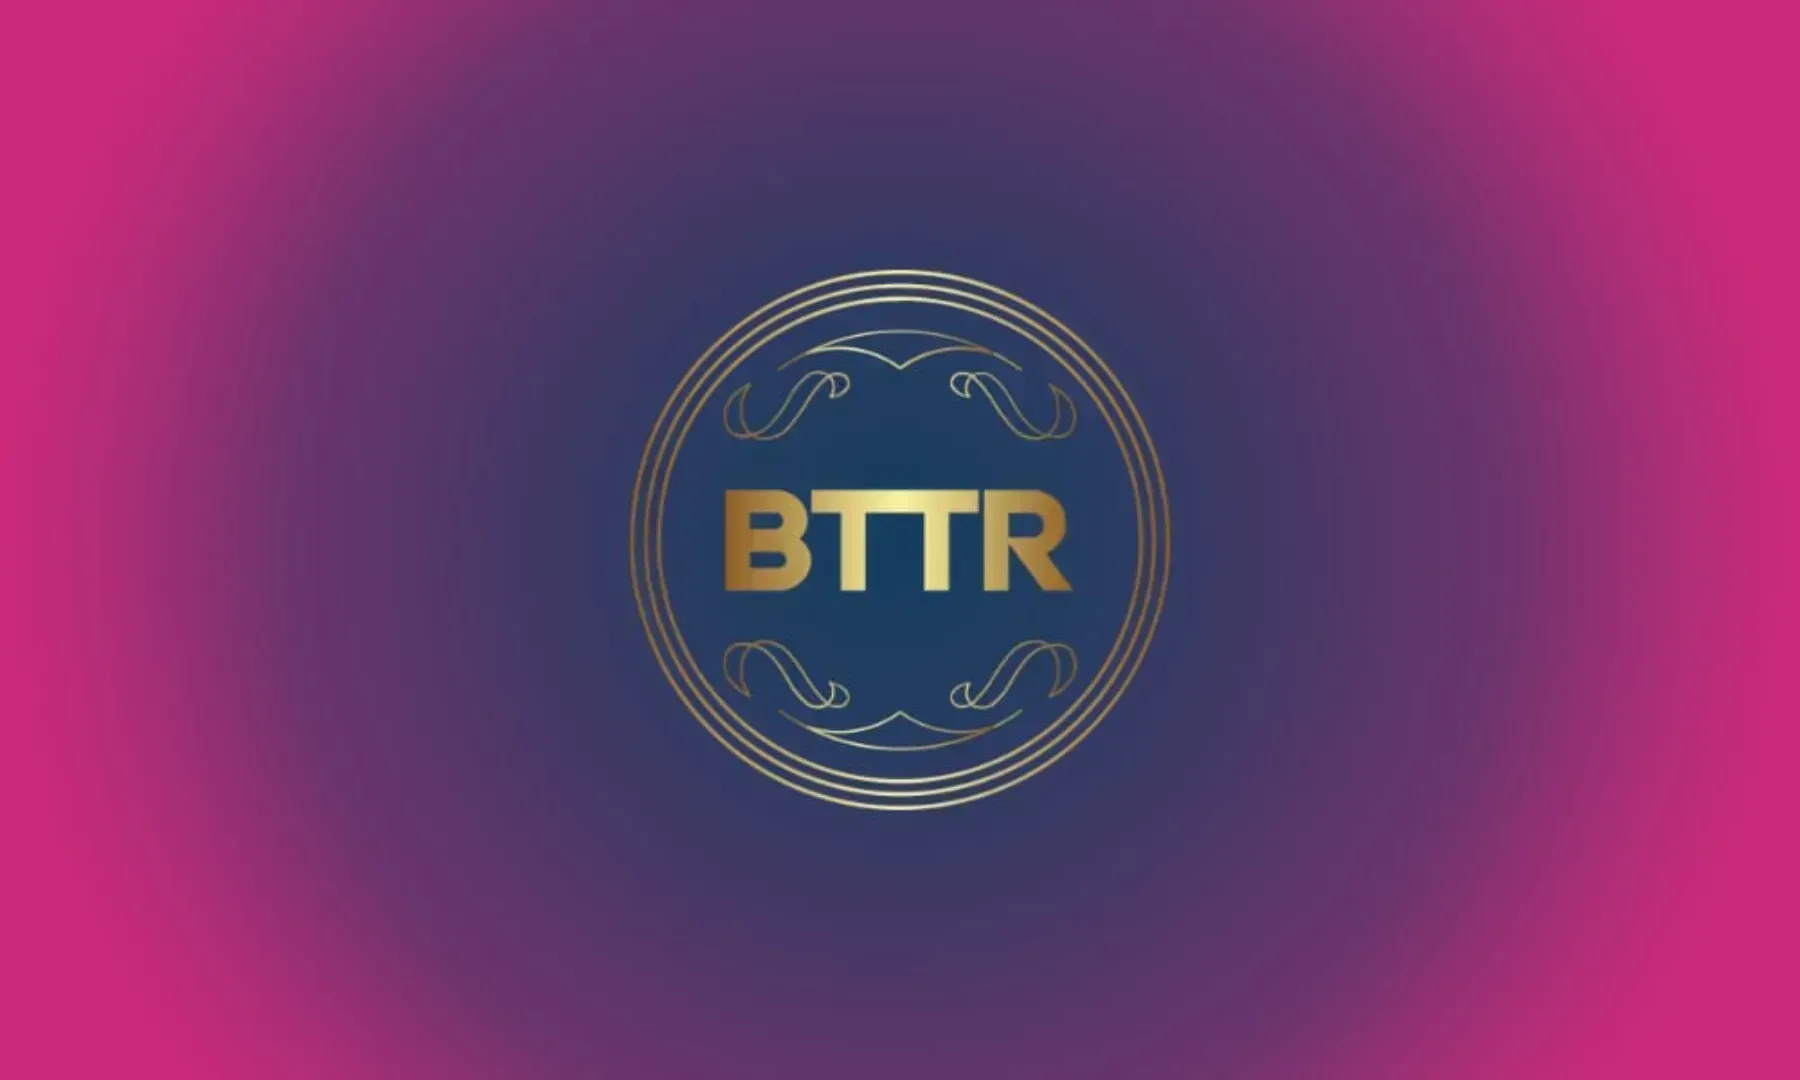 Welcome to BTTR - logo on blue and pink background